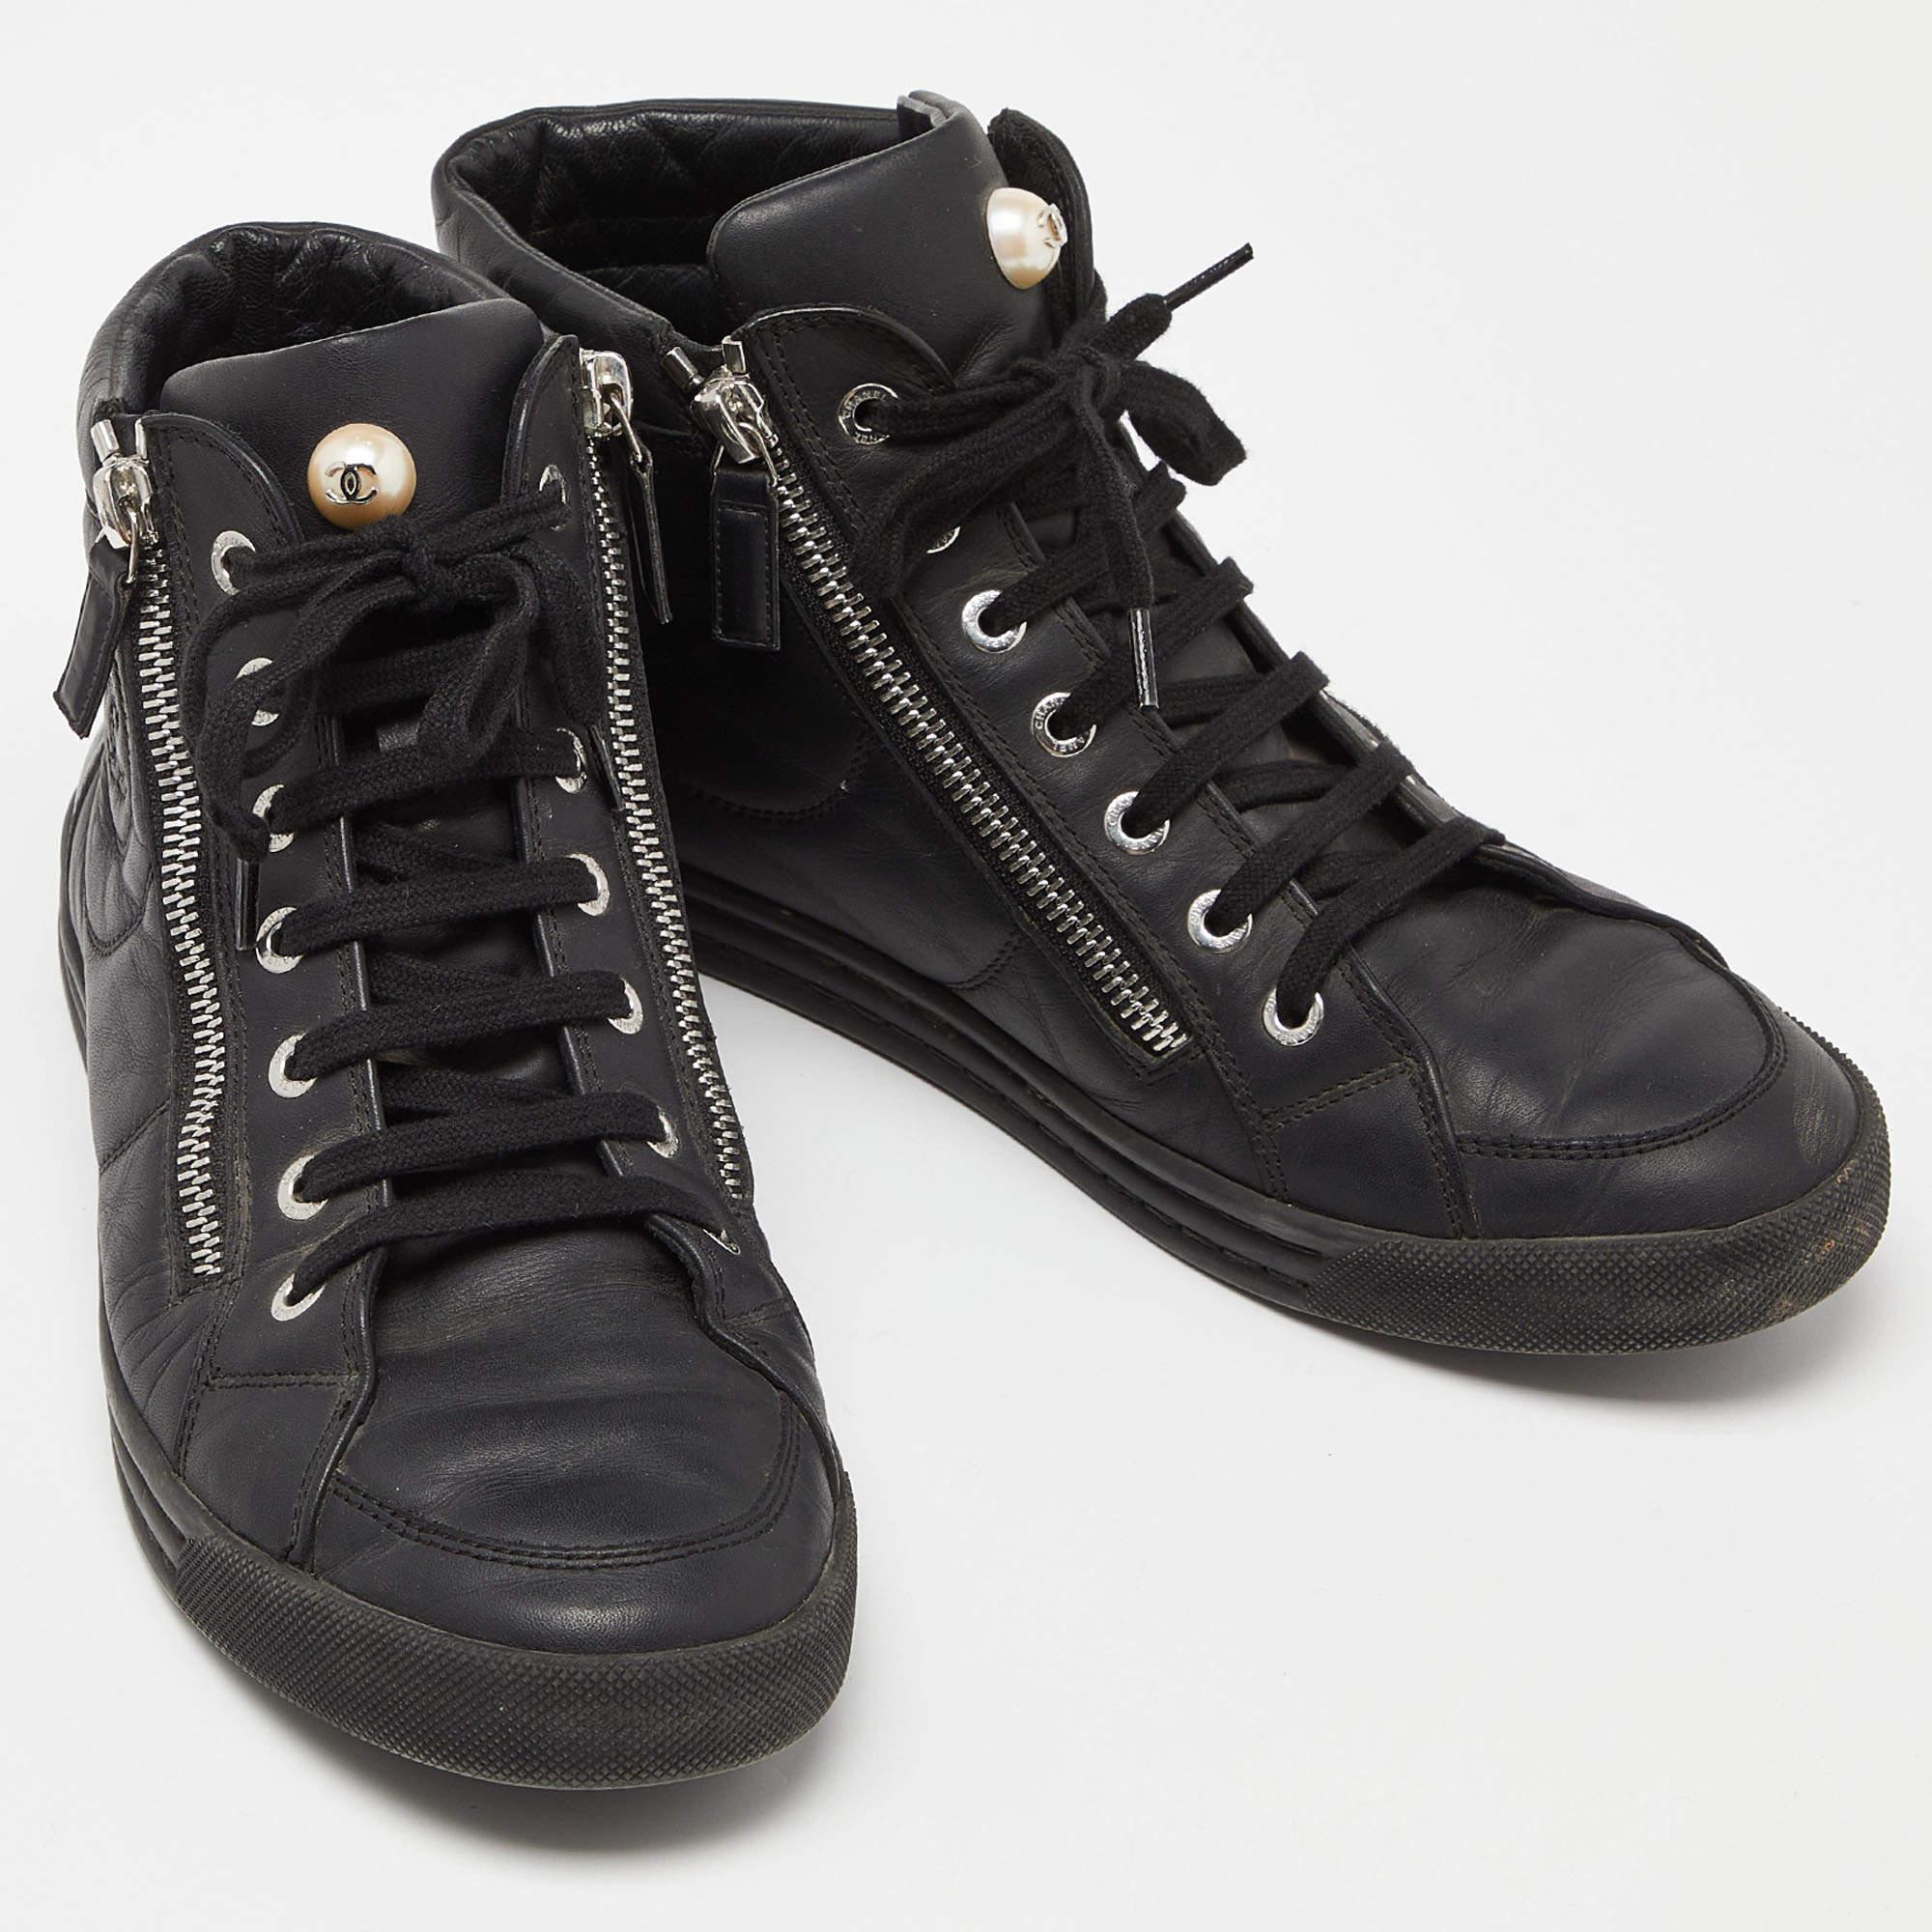 Chanel Black Leather CC Zip Link High Top Sneakers Size 39.5 In Fair Condition For Sale In Dubai, Al Qouz 2